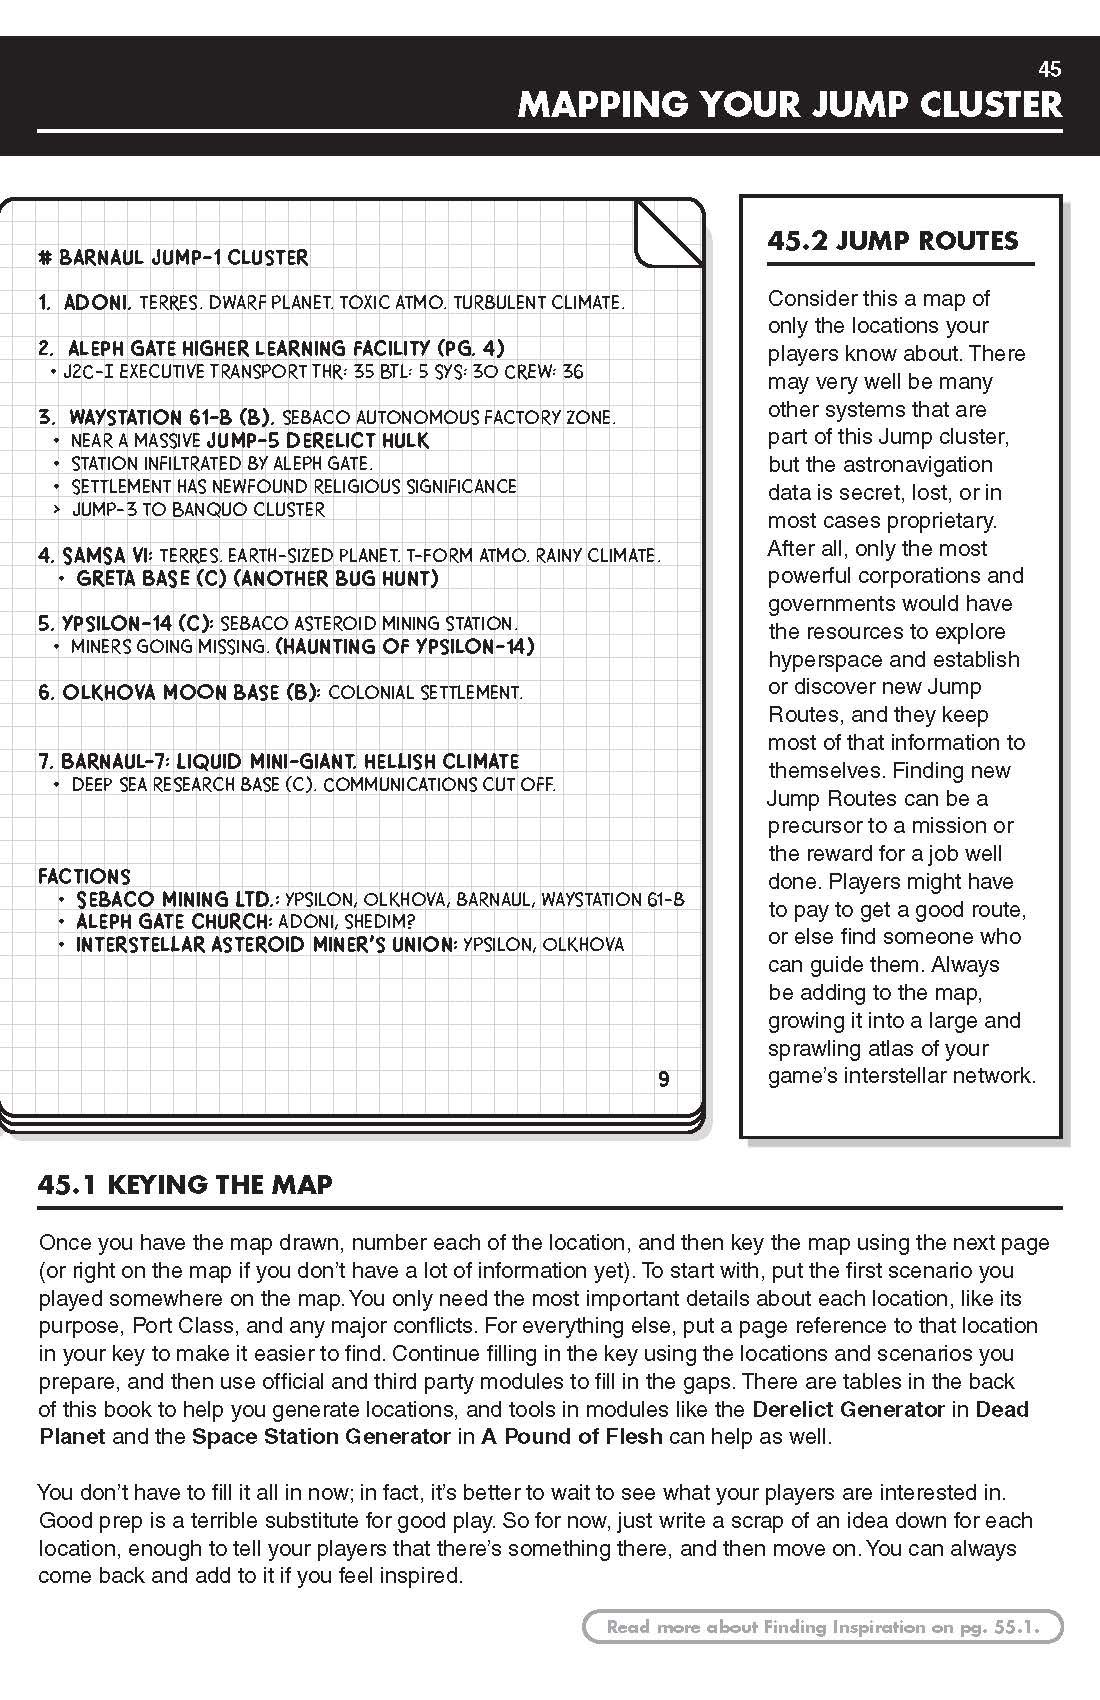 An example of a science fiction campaign essay notebook. Textbook-style material around the edge of the frame indicates what each section of the page should be.